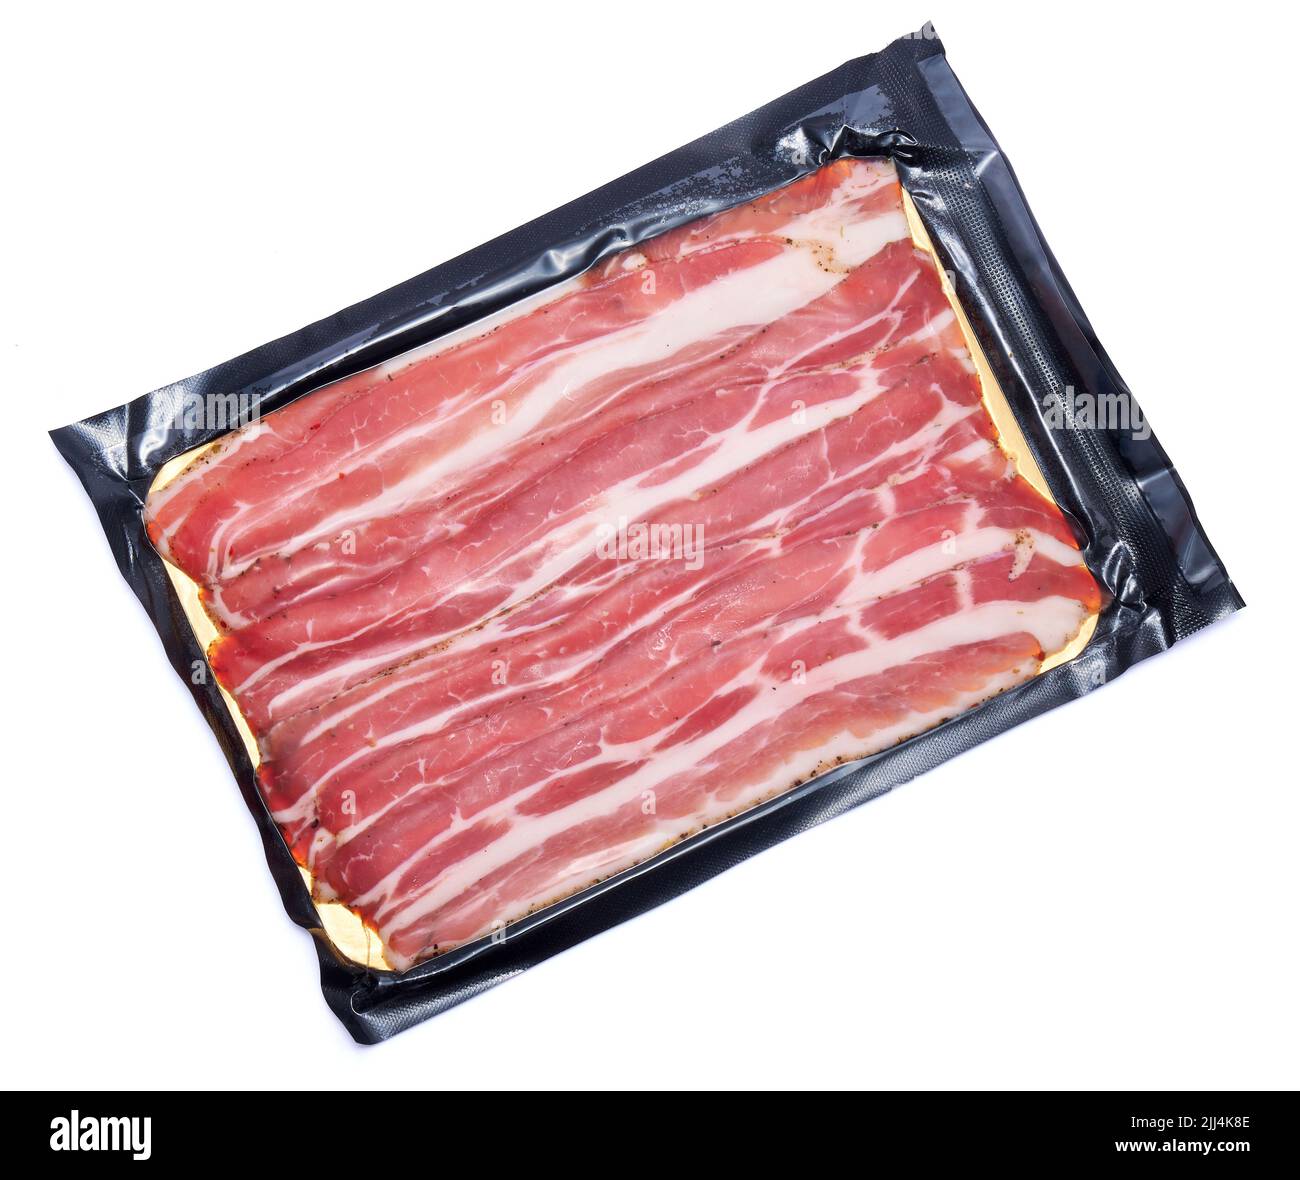 Bacon strips in plastic package for wholesales isolated on white background Stock Photo